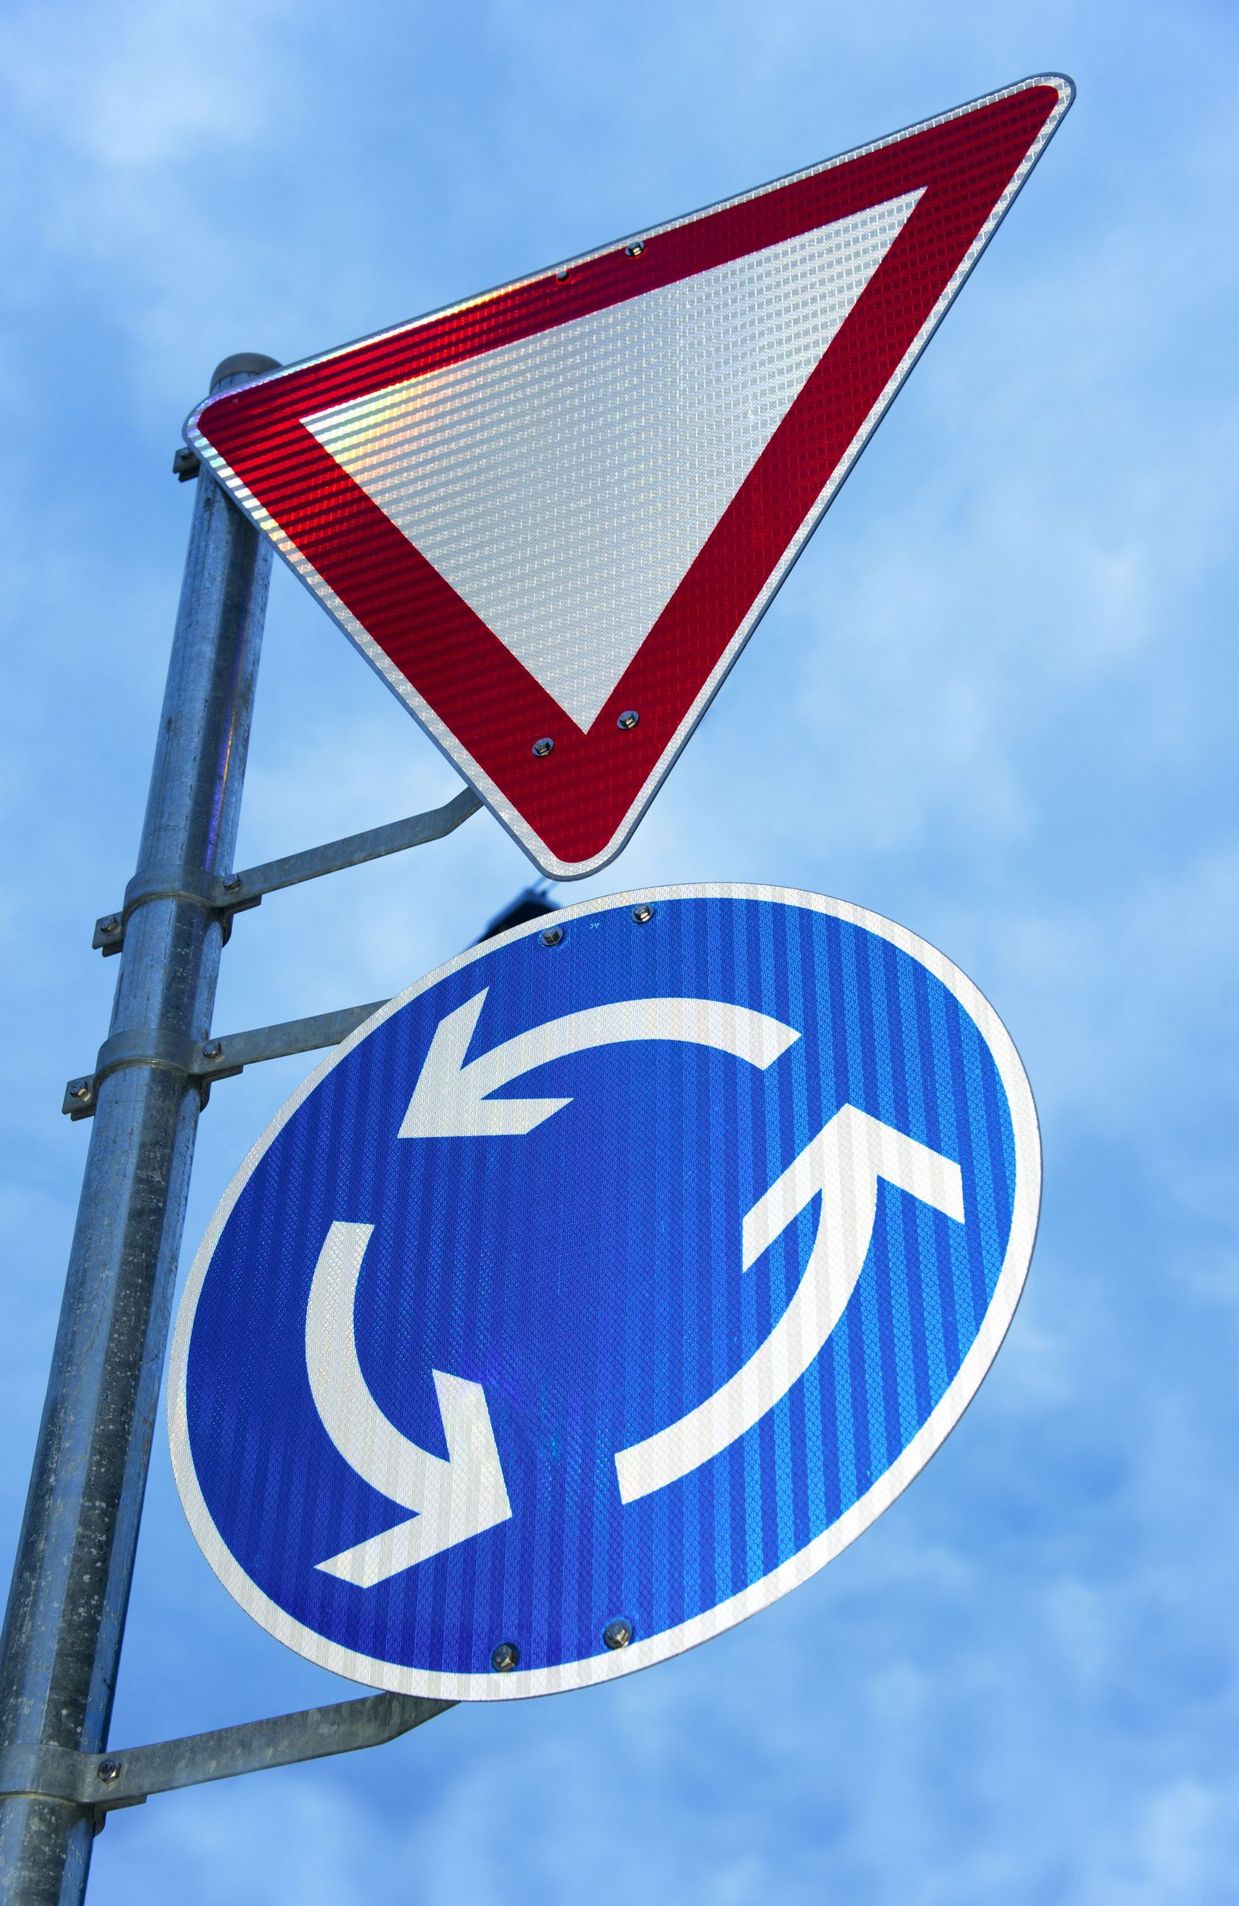 Traffic signs at roundabout